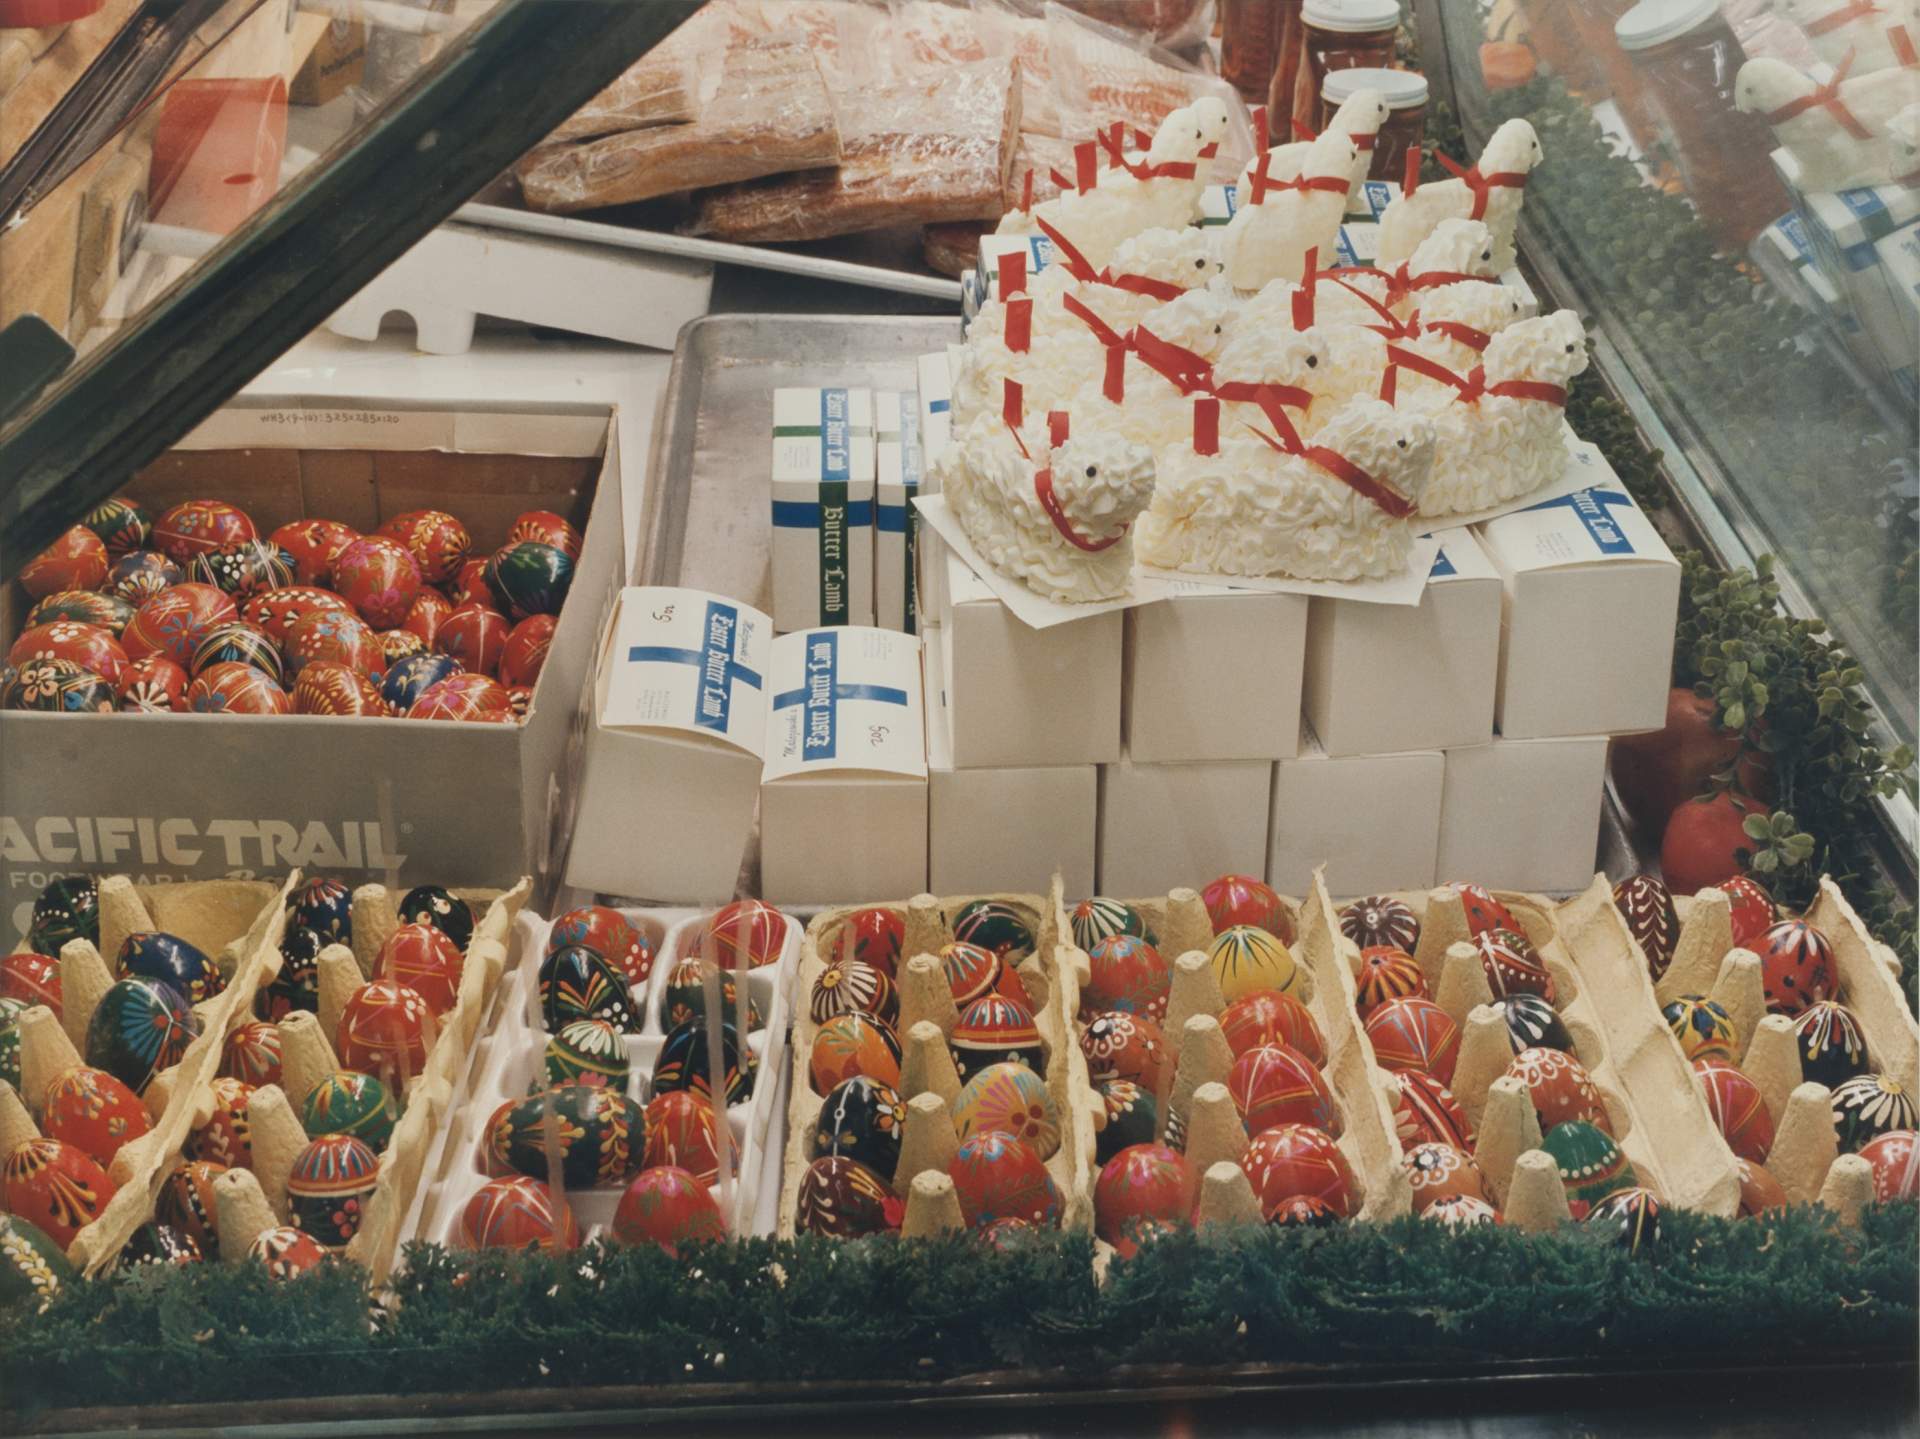 Butter Lambs and Easter Eggs, Penney’s Dairy, Broadway Market, Buffalo, NY, Spring 1988